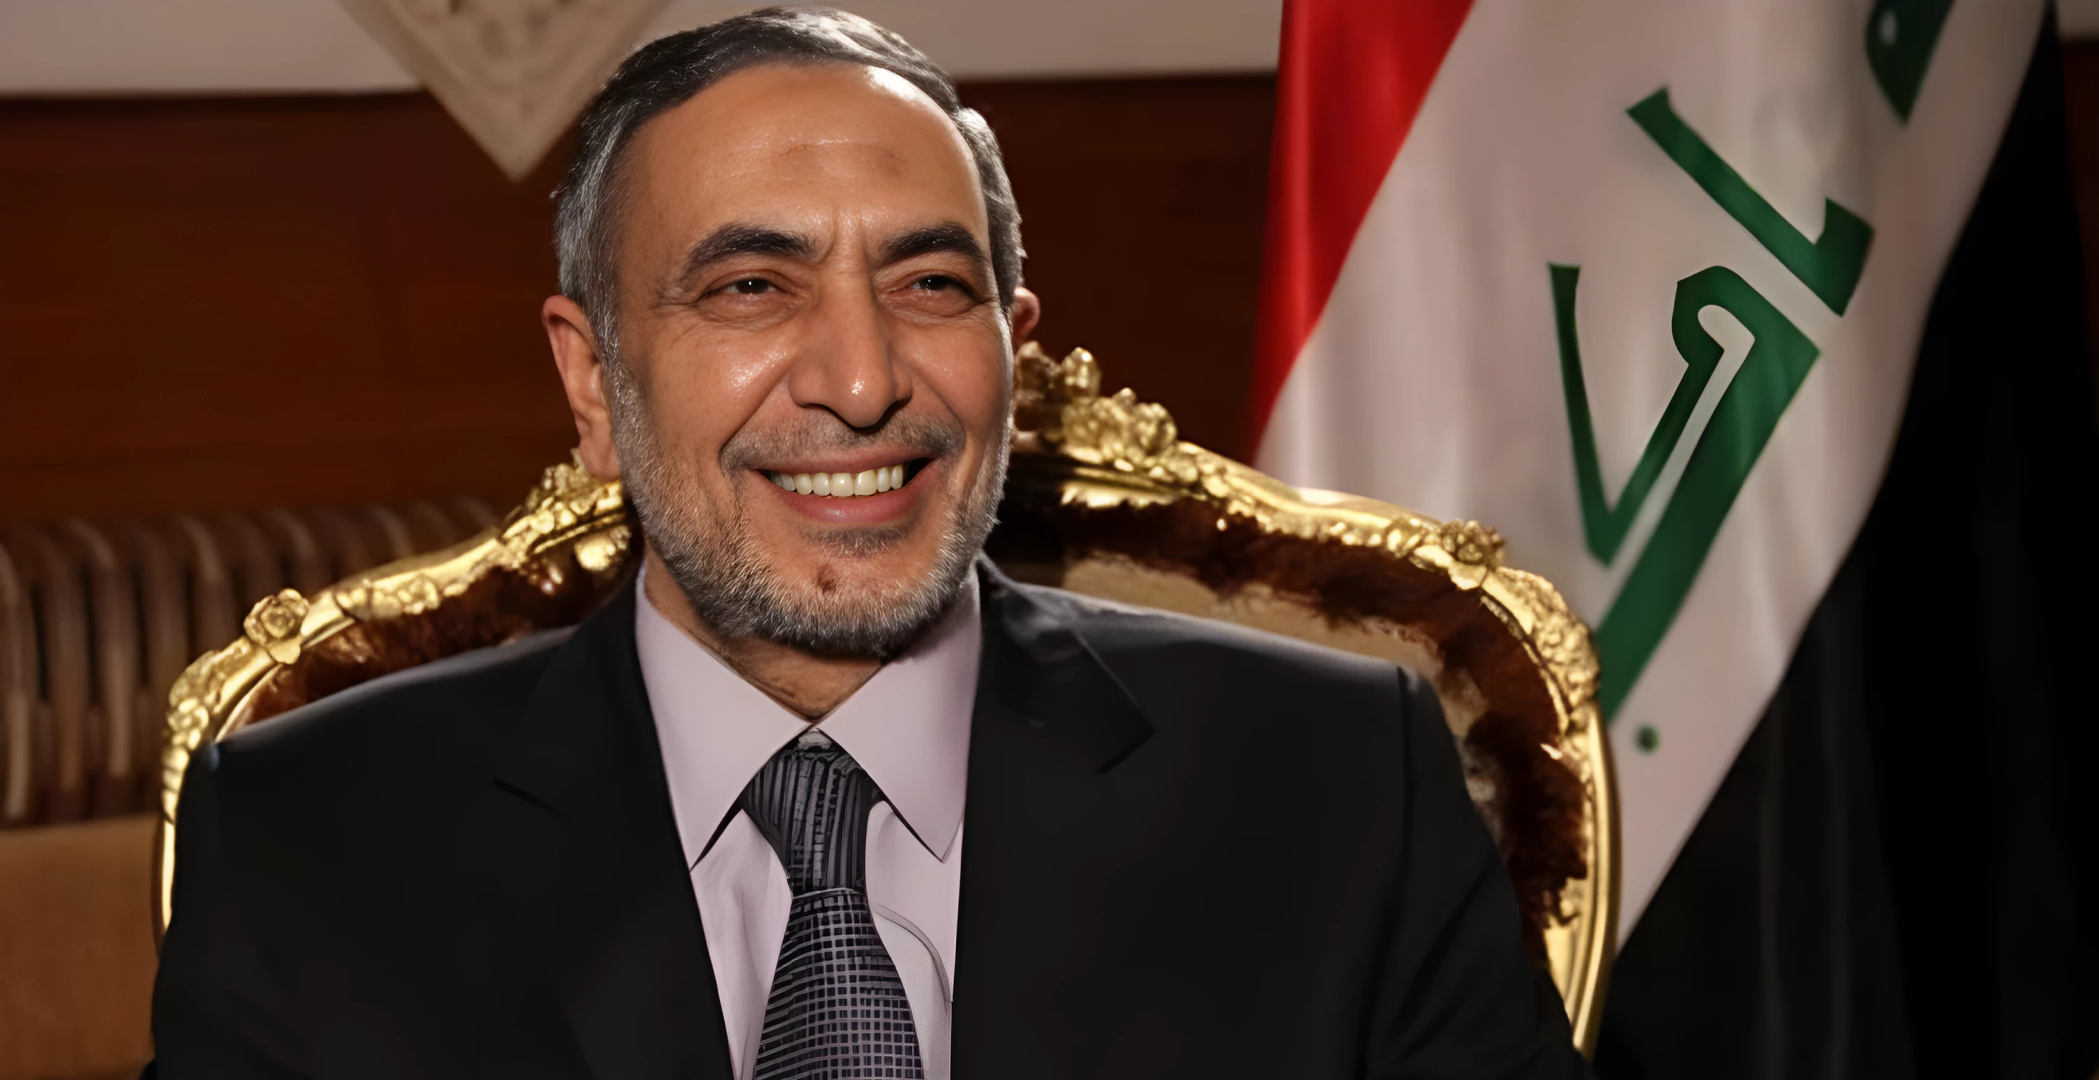 After joining Al-Halbousi, an agreement was reached to nominate Mahmoud Al-Mashhadani for the presidency of Parliament